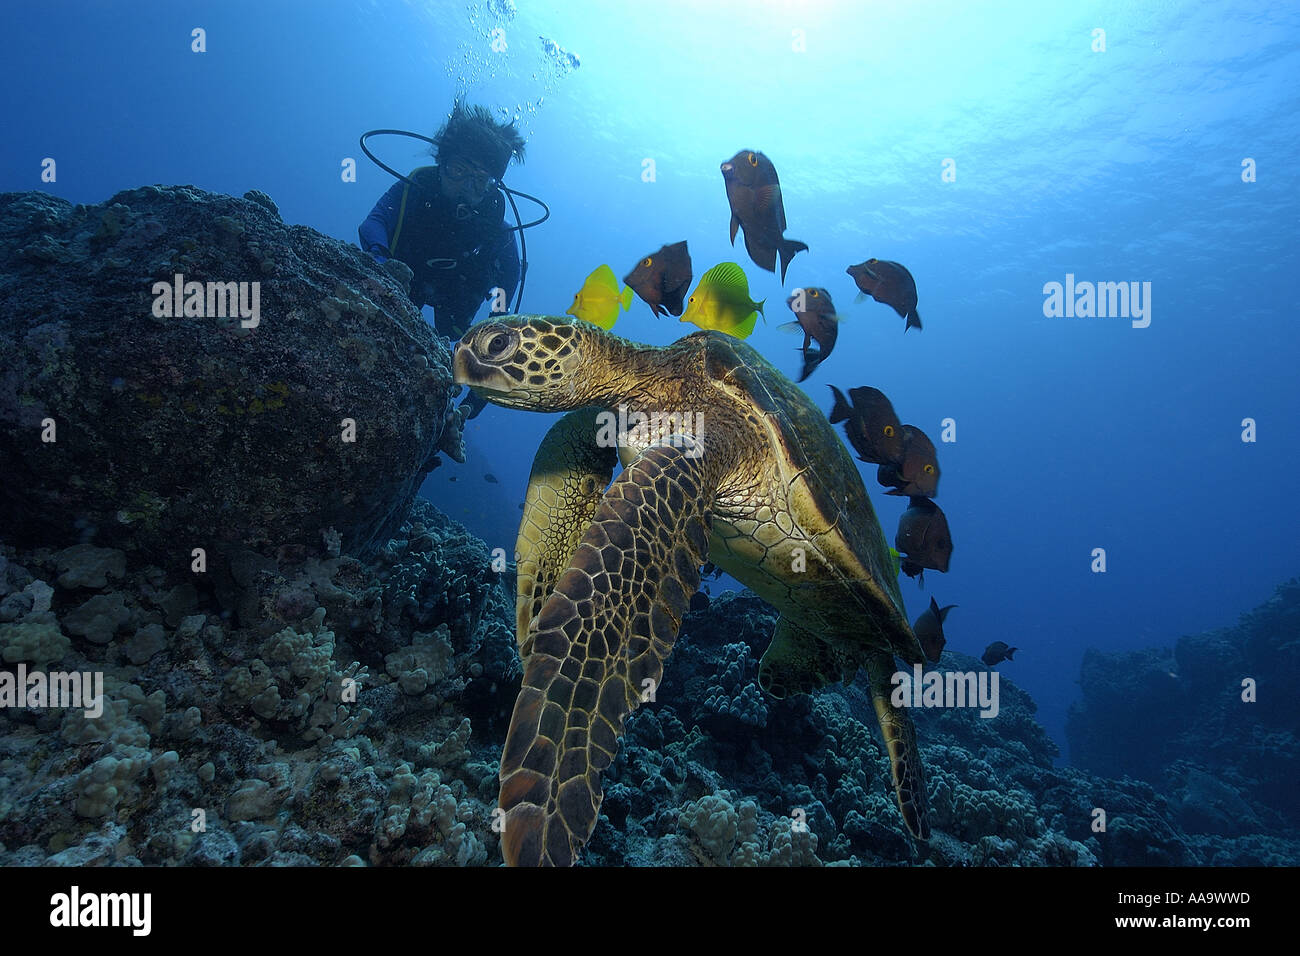 Diver observes as green sea turtle Chelonia mydas is cleaned by yellow tangs and lined bristletooth Kailua Kona Hawaii Pacific Stock Photo